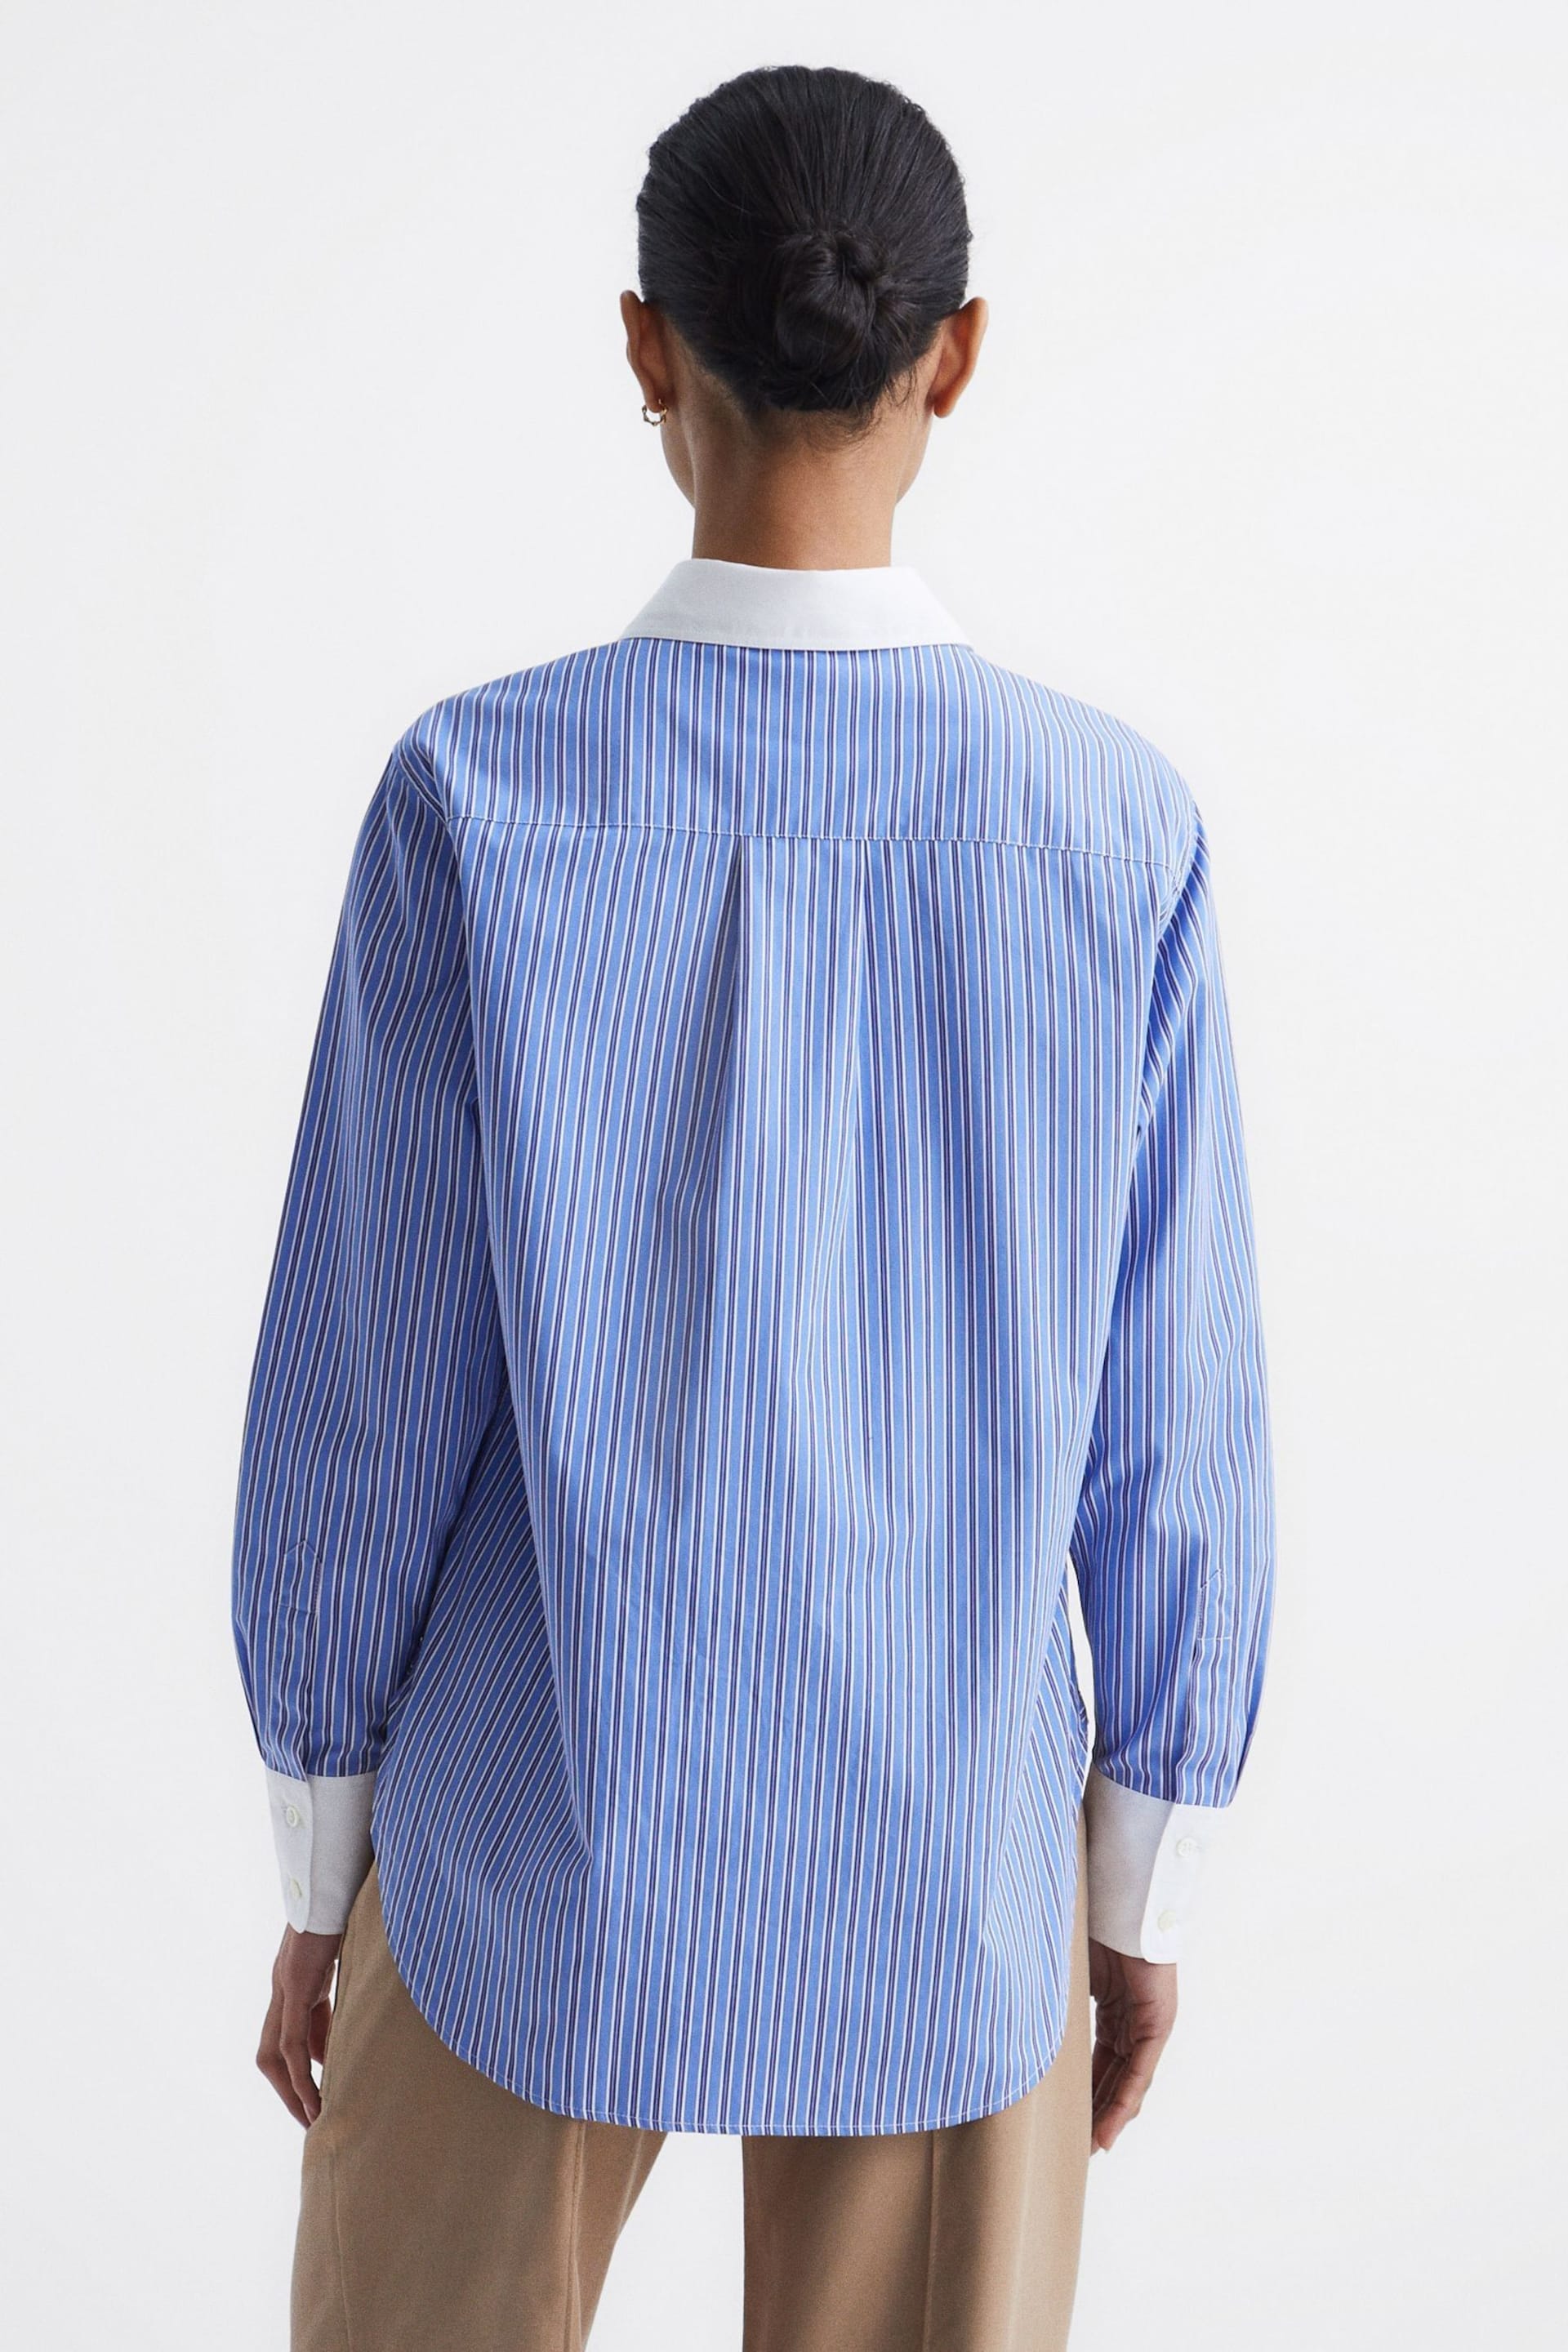 Reiss Blue/White Grace Contrast Stripe Collared Shirt - Image 5 of 6